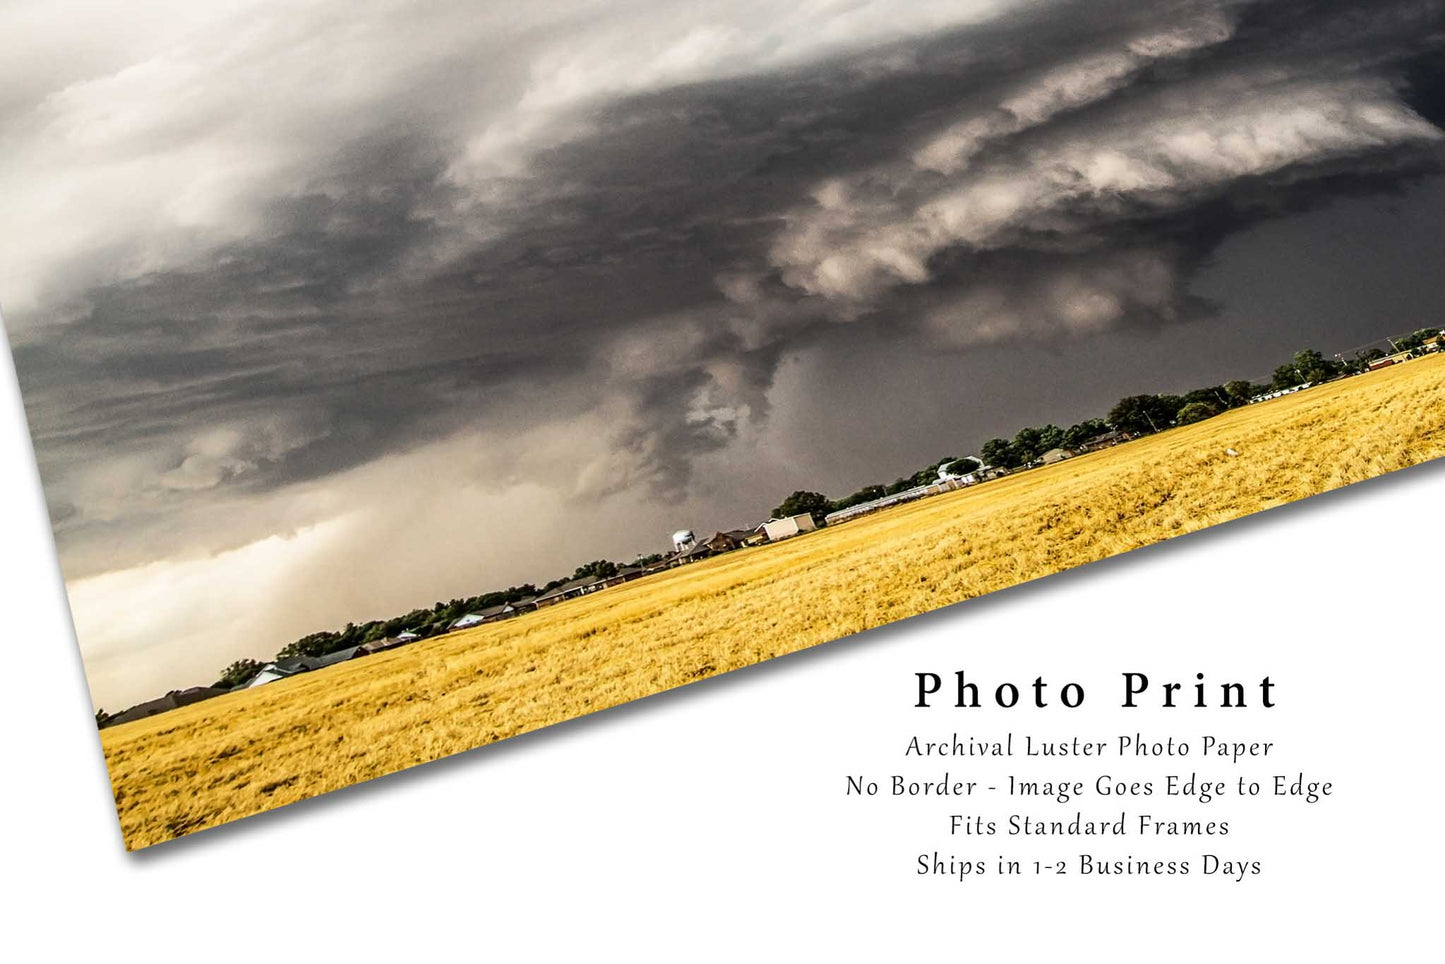 Storm Photography Print - Picture of Supercell Thunderstorm with Wall Cloud Over Small Town in Oklahoma - Weather Photo Artwork Decor